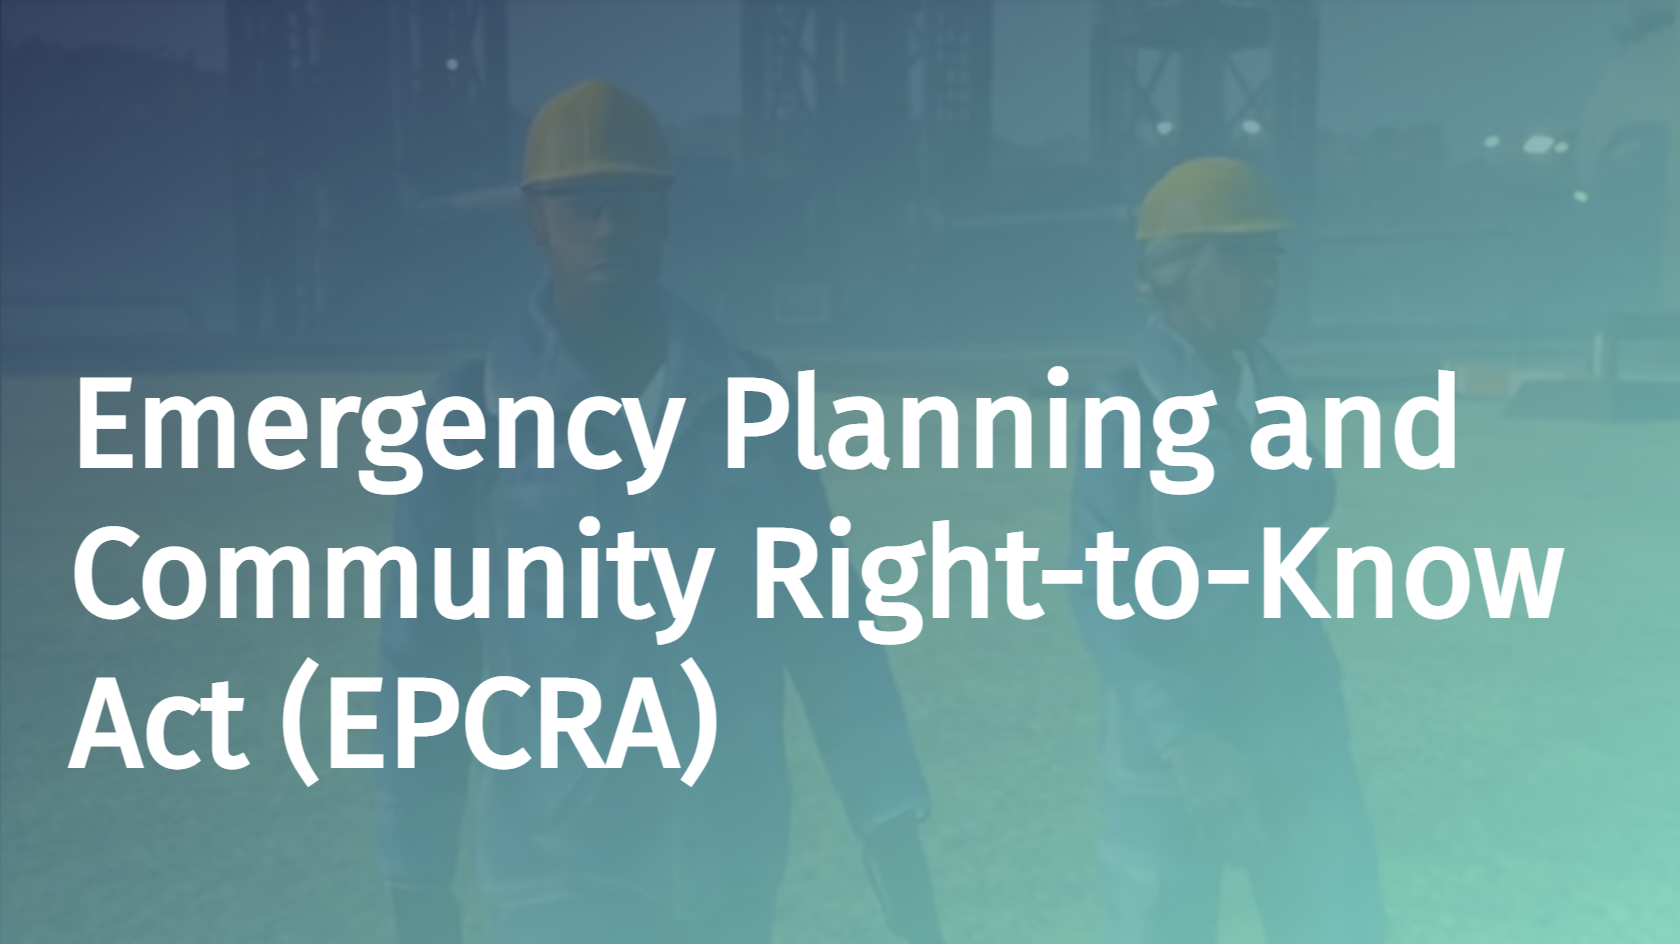 Emergency Planning and Community Right-to-Know Act (EPCRA)